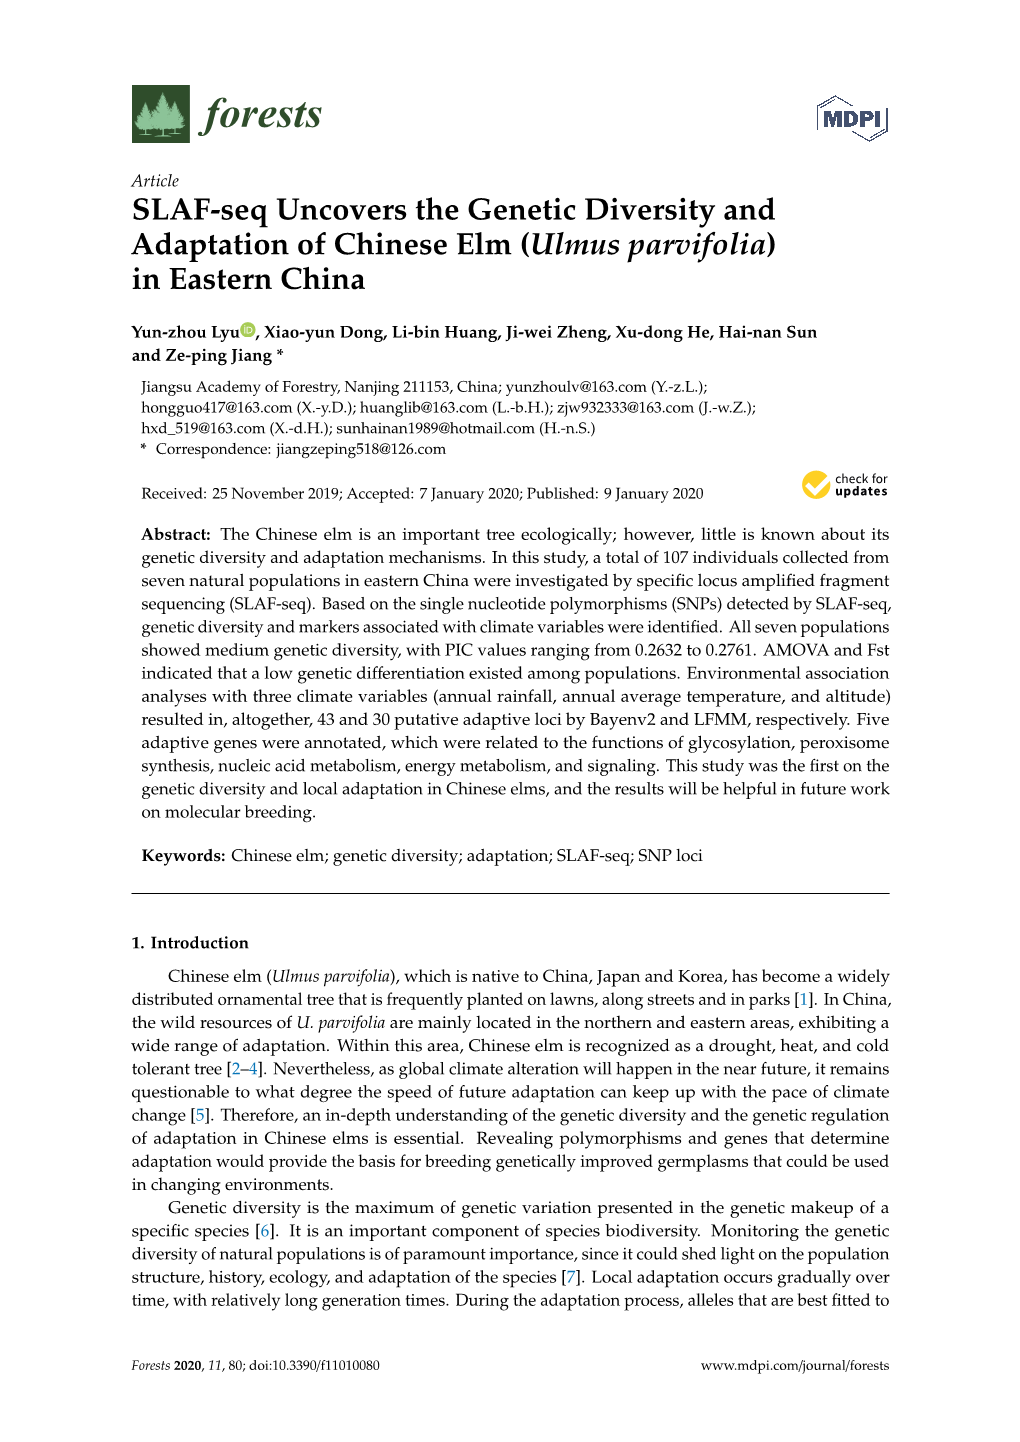 SLAF-Seq Uncovers the Genetic Diversity and Adaptation of Chinese Elm (Ulmus Parvifolia) in Eastern China